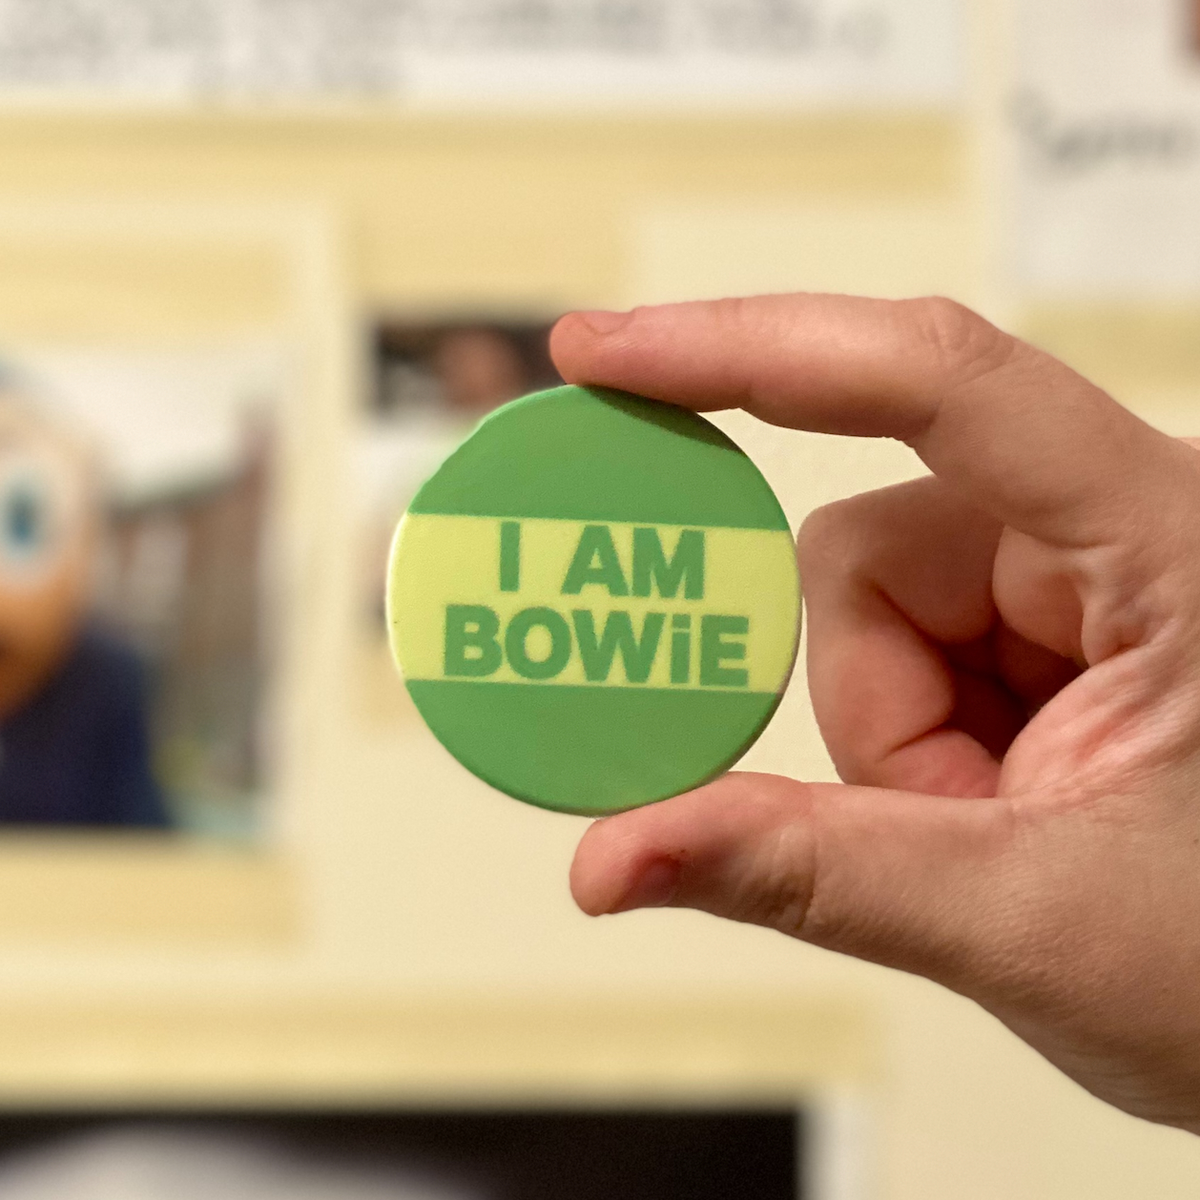 I am BOWiE Pin Badge